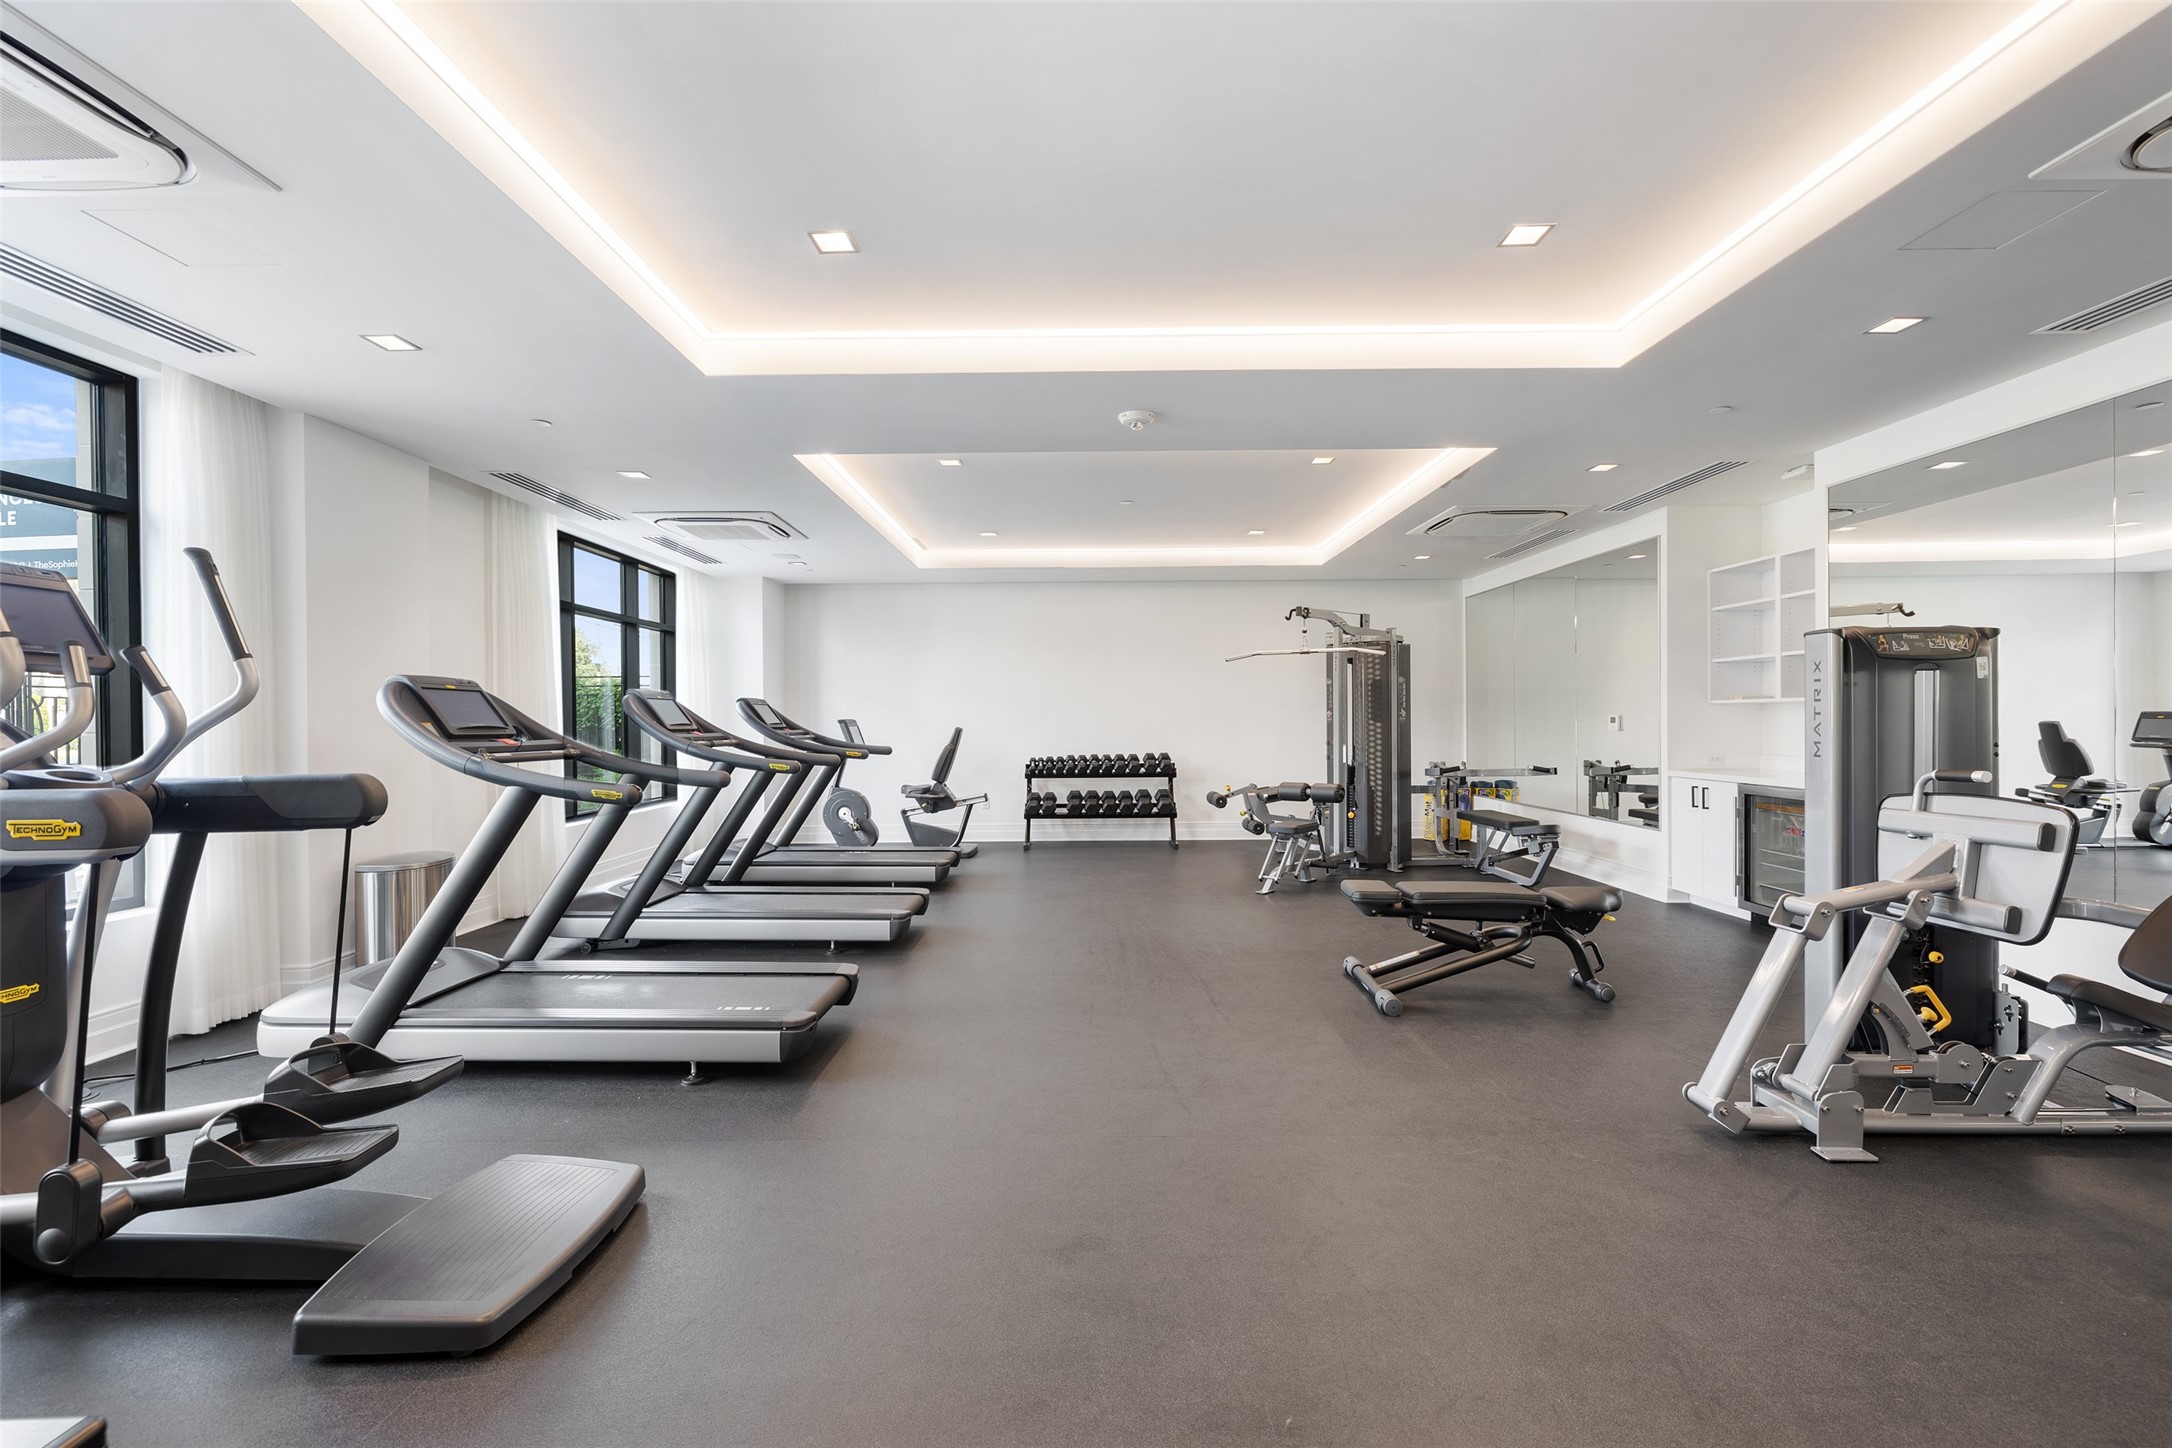 The Sophie's Fitness Center is perfect for maintaining health and wellness.